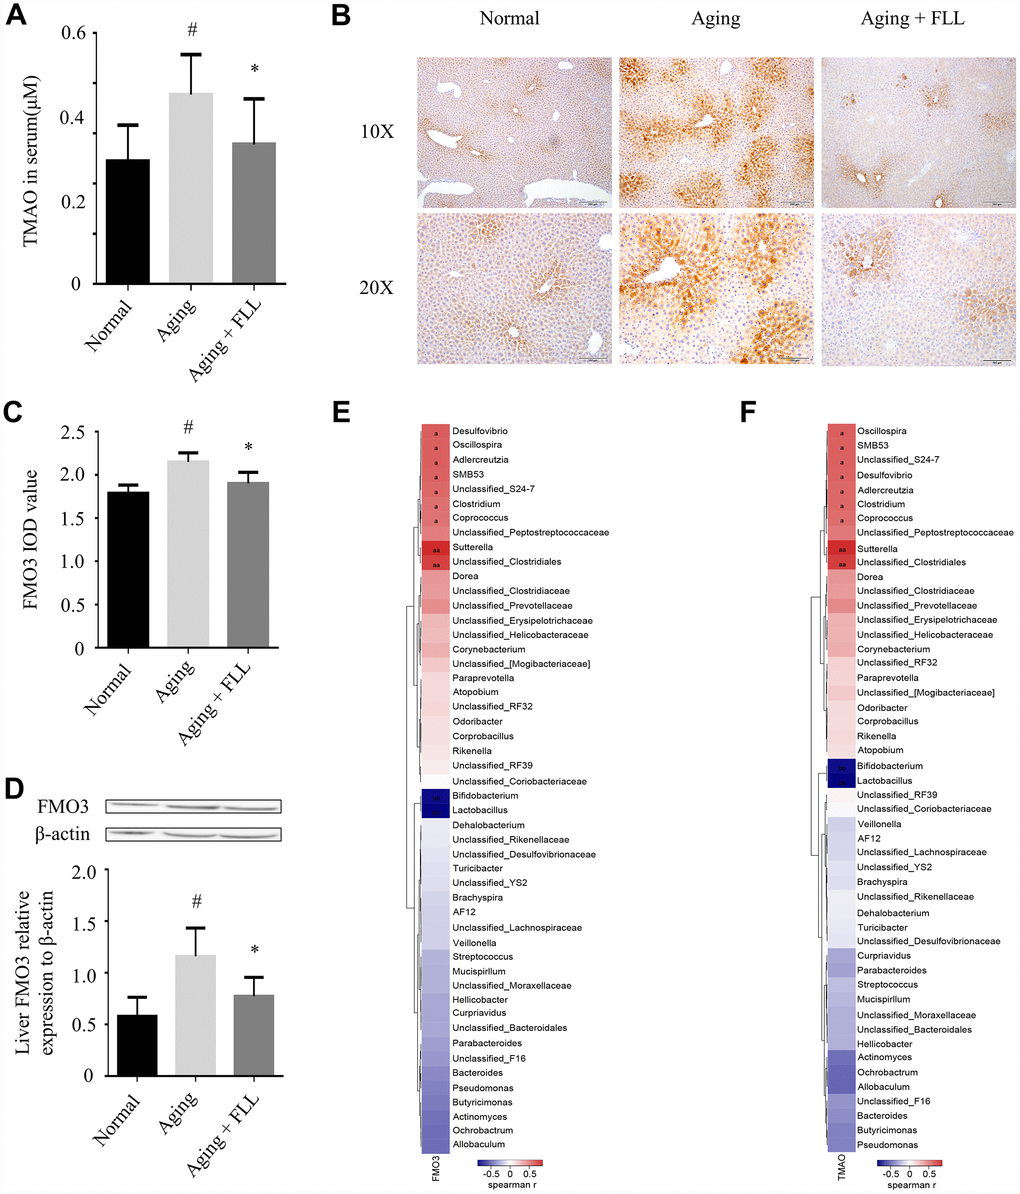 Fructus Ligustri Lucidi (FLL) decreases the expression of FMO3 and the levels of circulating TMAO in aging mice. (A) The circulating TMAO levels quantified by LC/MS/MS. The expression levels of FMO3 were analyzed by immunohistochemical staining (B–C) and western blot (D) in the livers. (E–F) Correlation heat map indicating the association between the specific microbiota taxonomic genera and FMO3 expressions (E) and TMAO levels (F). Red indicates a positive association, blue denotes a negative association, and white manifests no association. a denotes a significant false discovery rate (FDR)-adjusted positive correlation at p values of aa denotes a significant FDR-adjusted positive correlation at p values of b denotes a significant FDR-adjusted negative correlation at p values of bb denotes a significant FDR-adjusted negative correlation at P values of p 